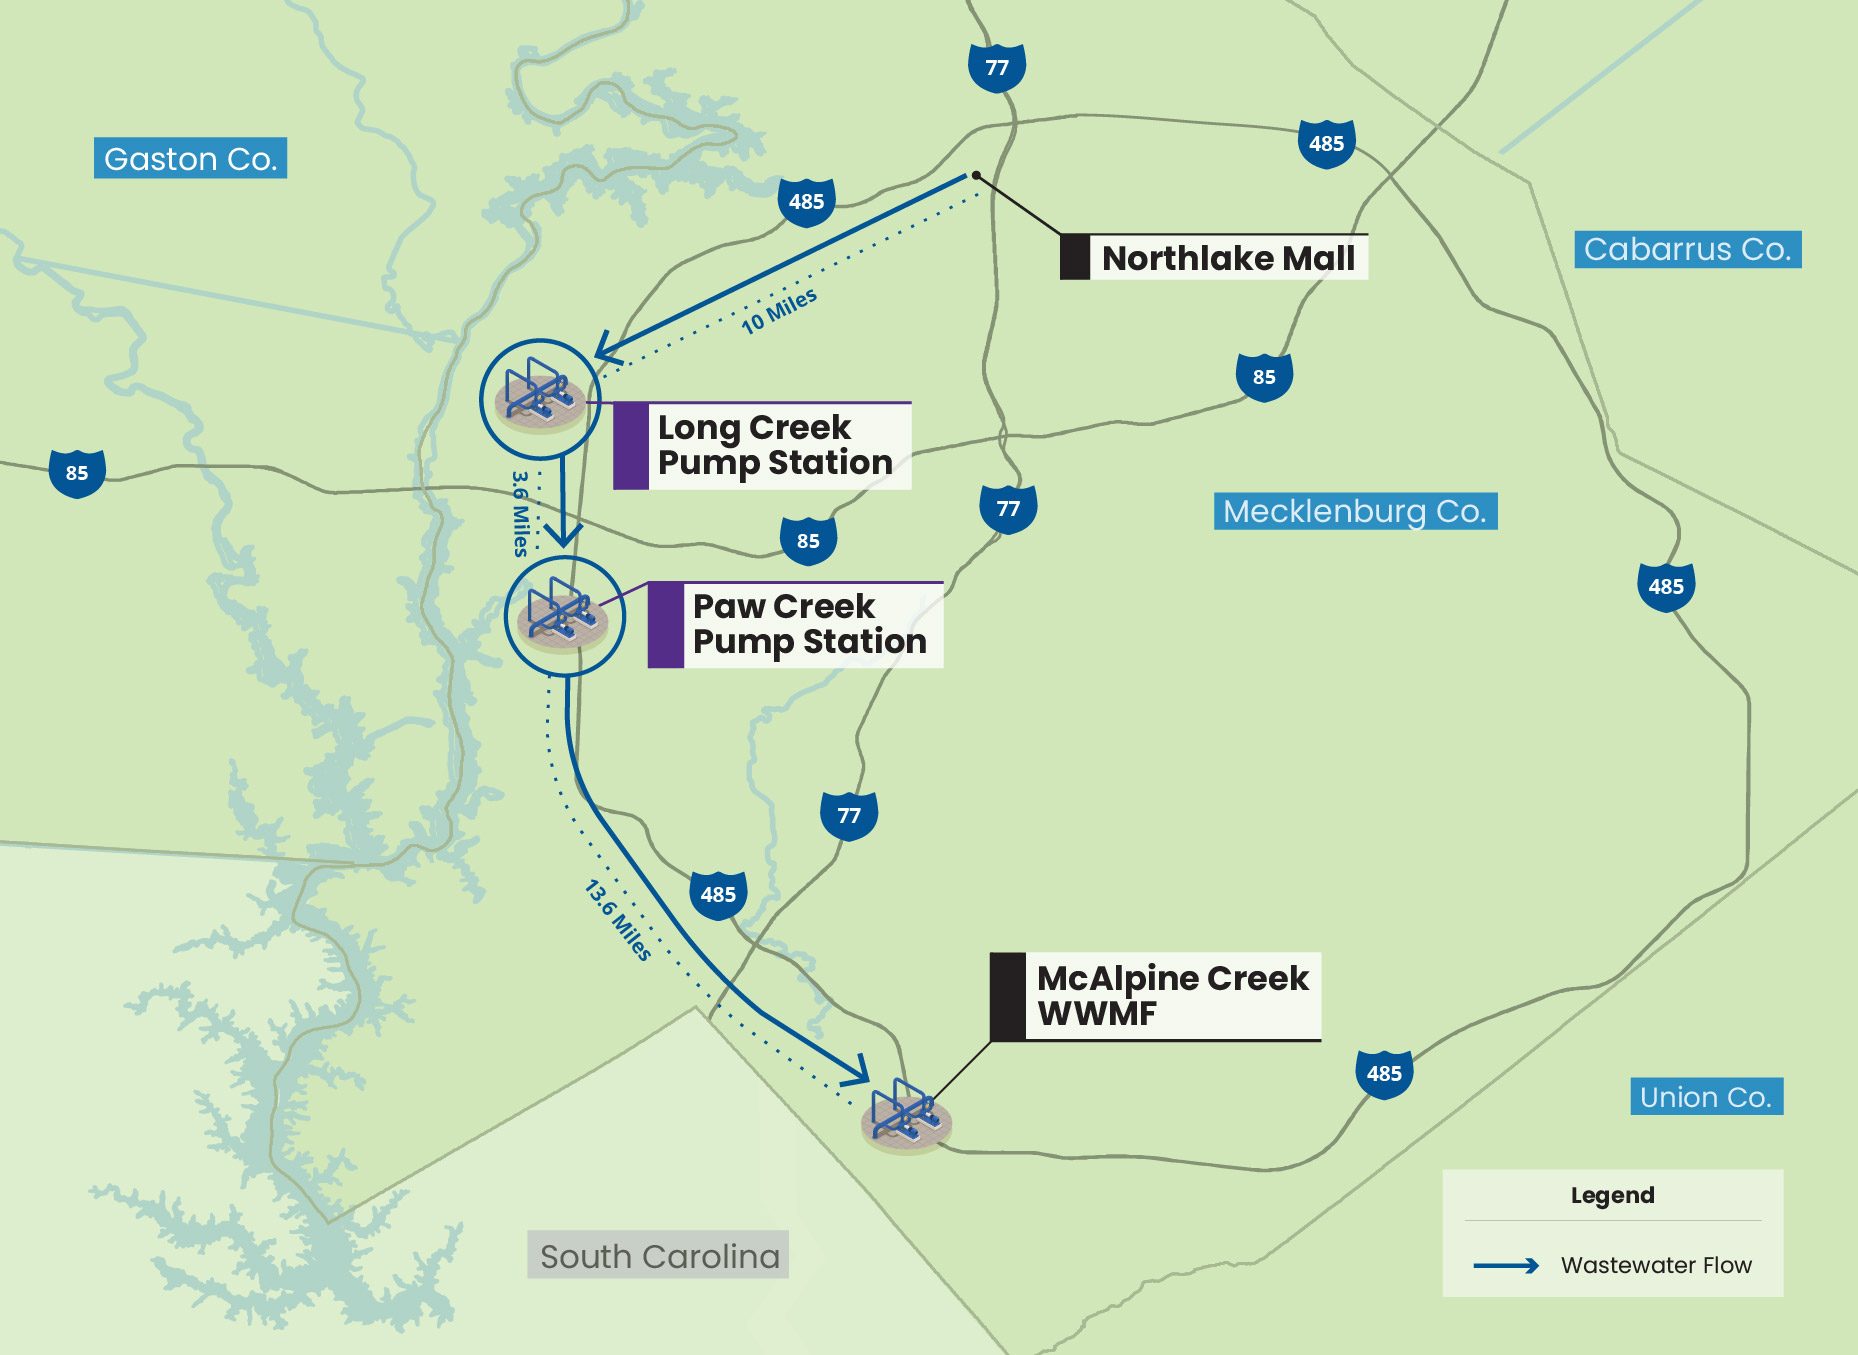 Map of Charlotte, North Carolina showing the 27 mile wastewater collection system from Northlake Mall to Long Creek Pump Station to Paw Creek Pump Station, and finally to McAlpine Creek Wastewater Management Facility in Pineville, North Carolina.